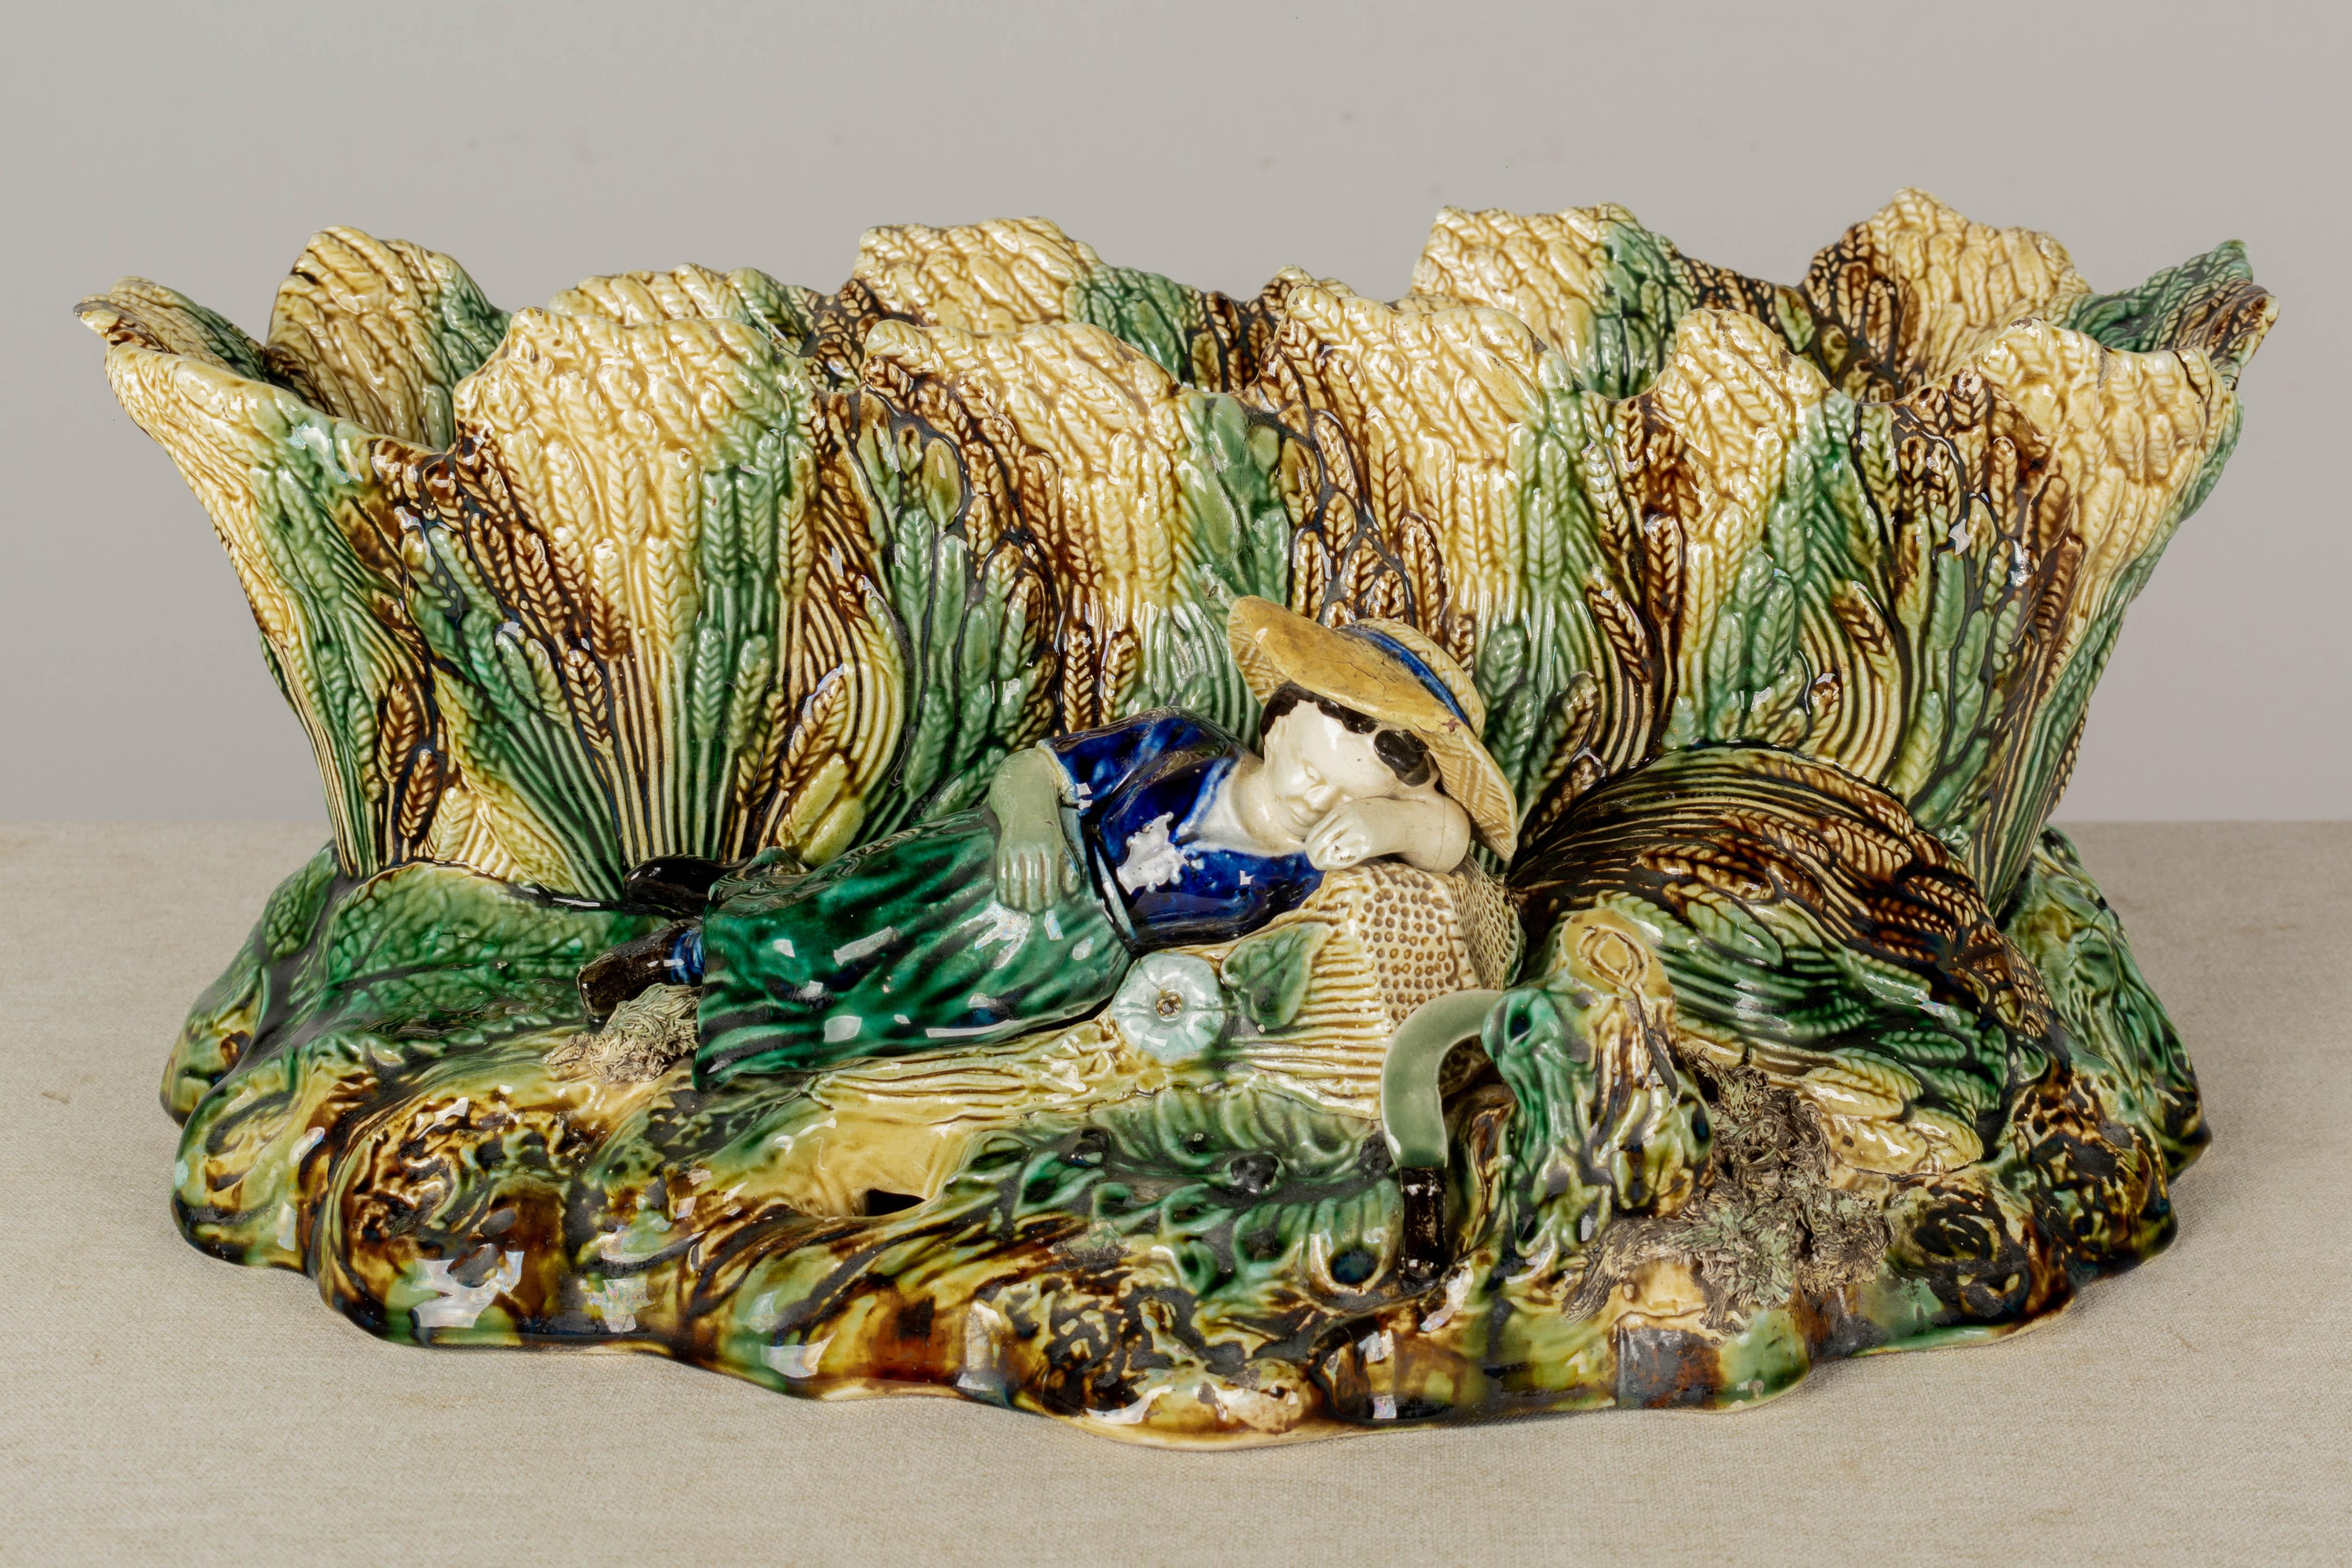 A large English Majolica glazed ceramic jardinière, or planter, oblong shape depicting a sleeping maiden in a field of wheat. Vividly colored glaze in green, brown, yellow ocher, and cobalt with dark brown interior. Perfect for the display of